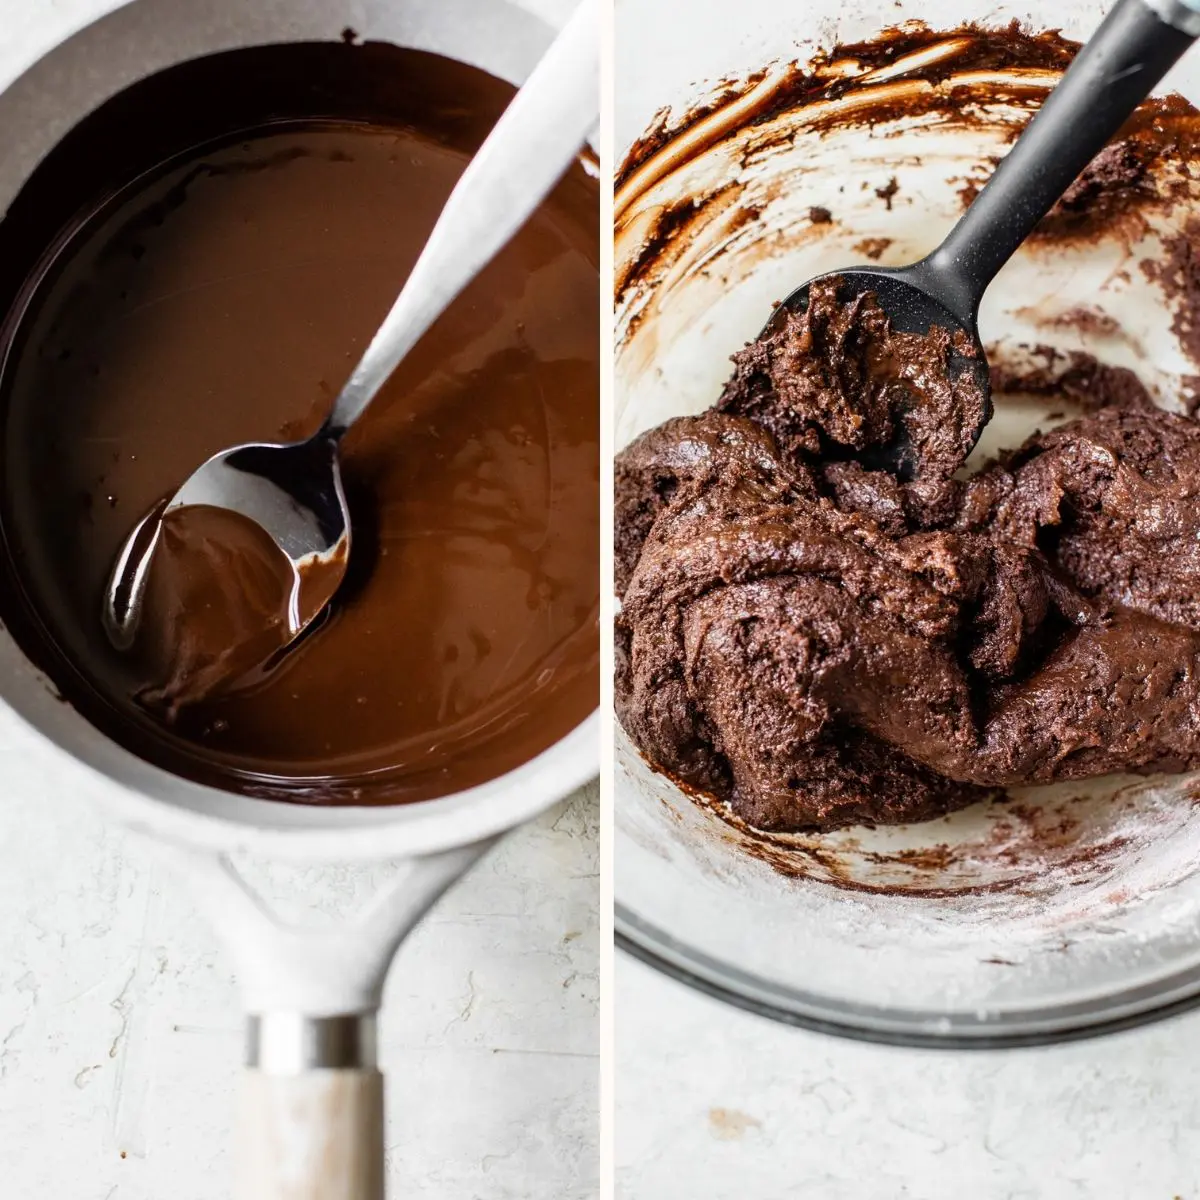 melted chocolate in a saucepan and brownie batter in a bowl